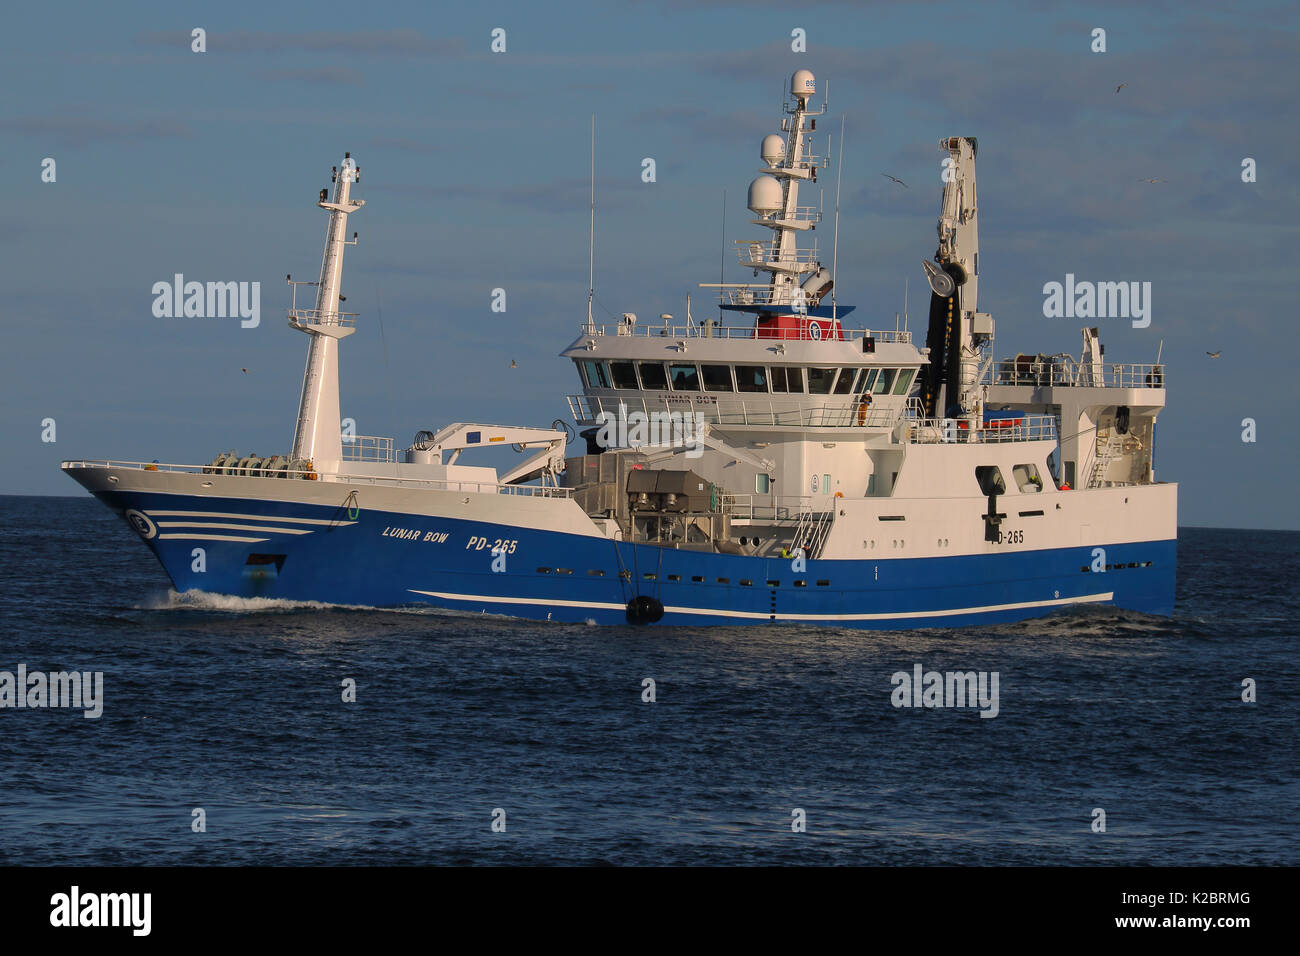 Pelagic fishing vessel 'Lunar Bow' approaching harbour, October 2014.  All non-editorial uses must be cleared individually. Stock Photo